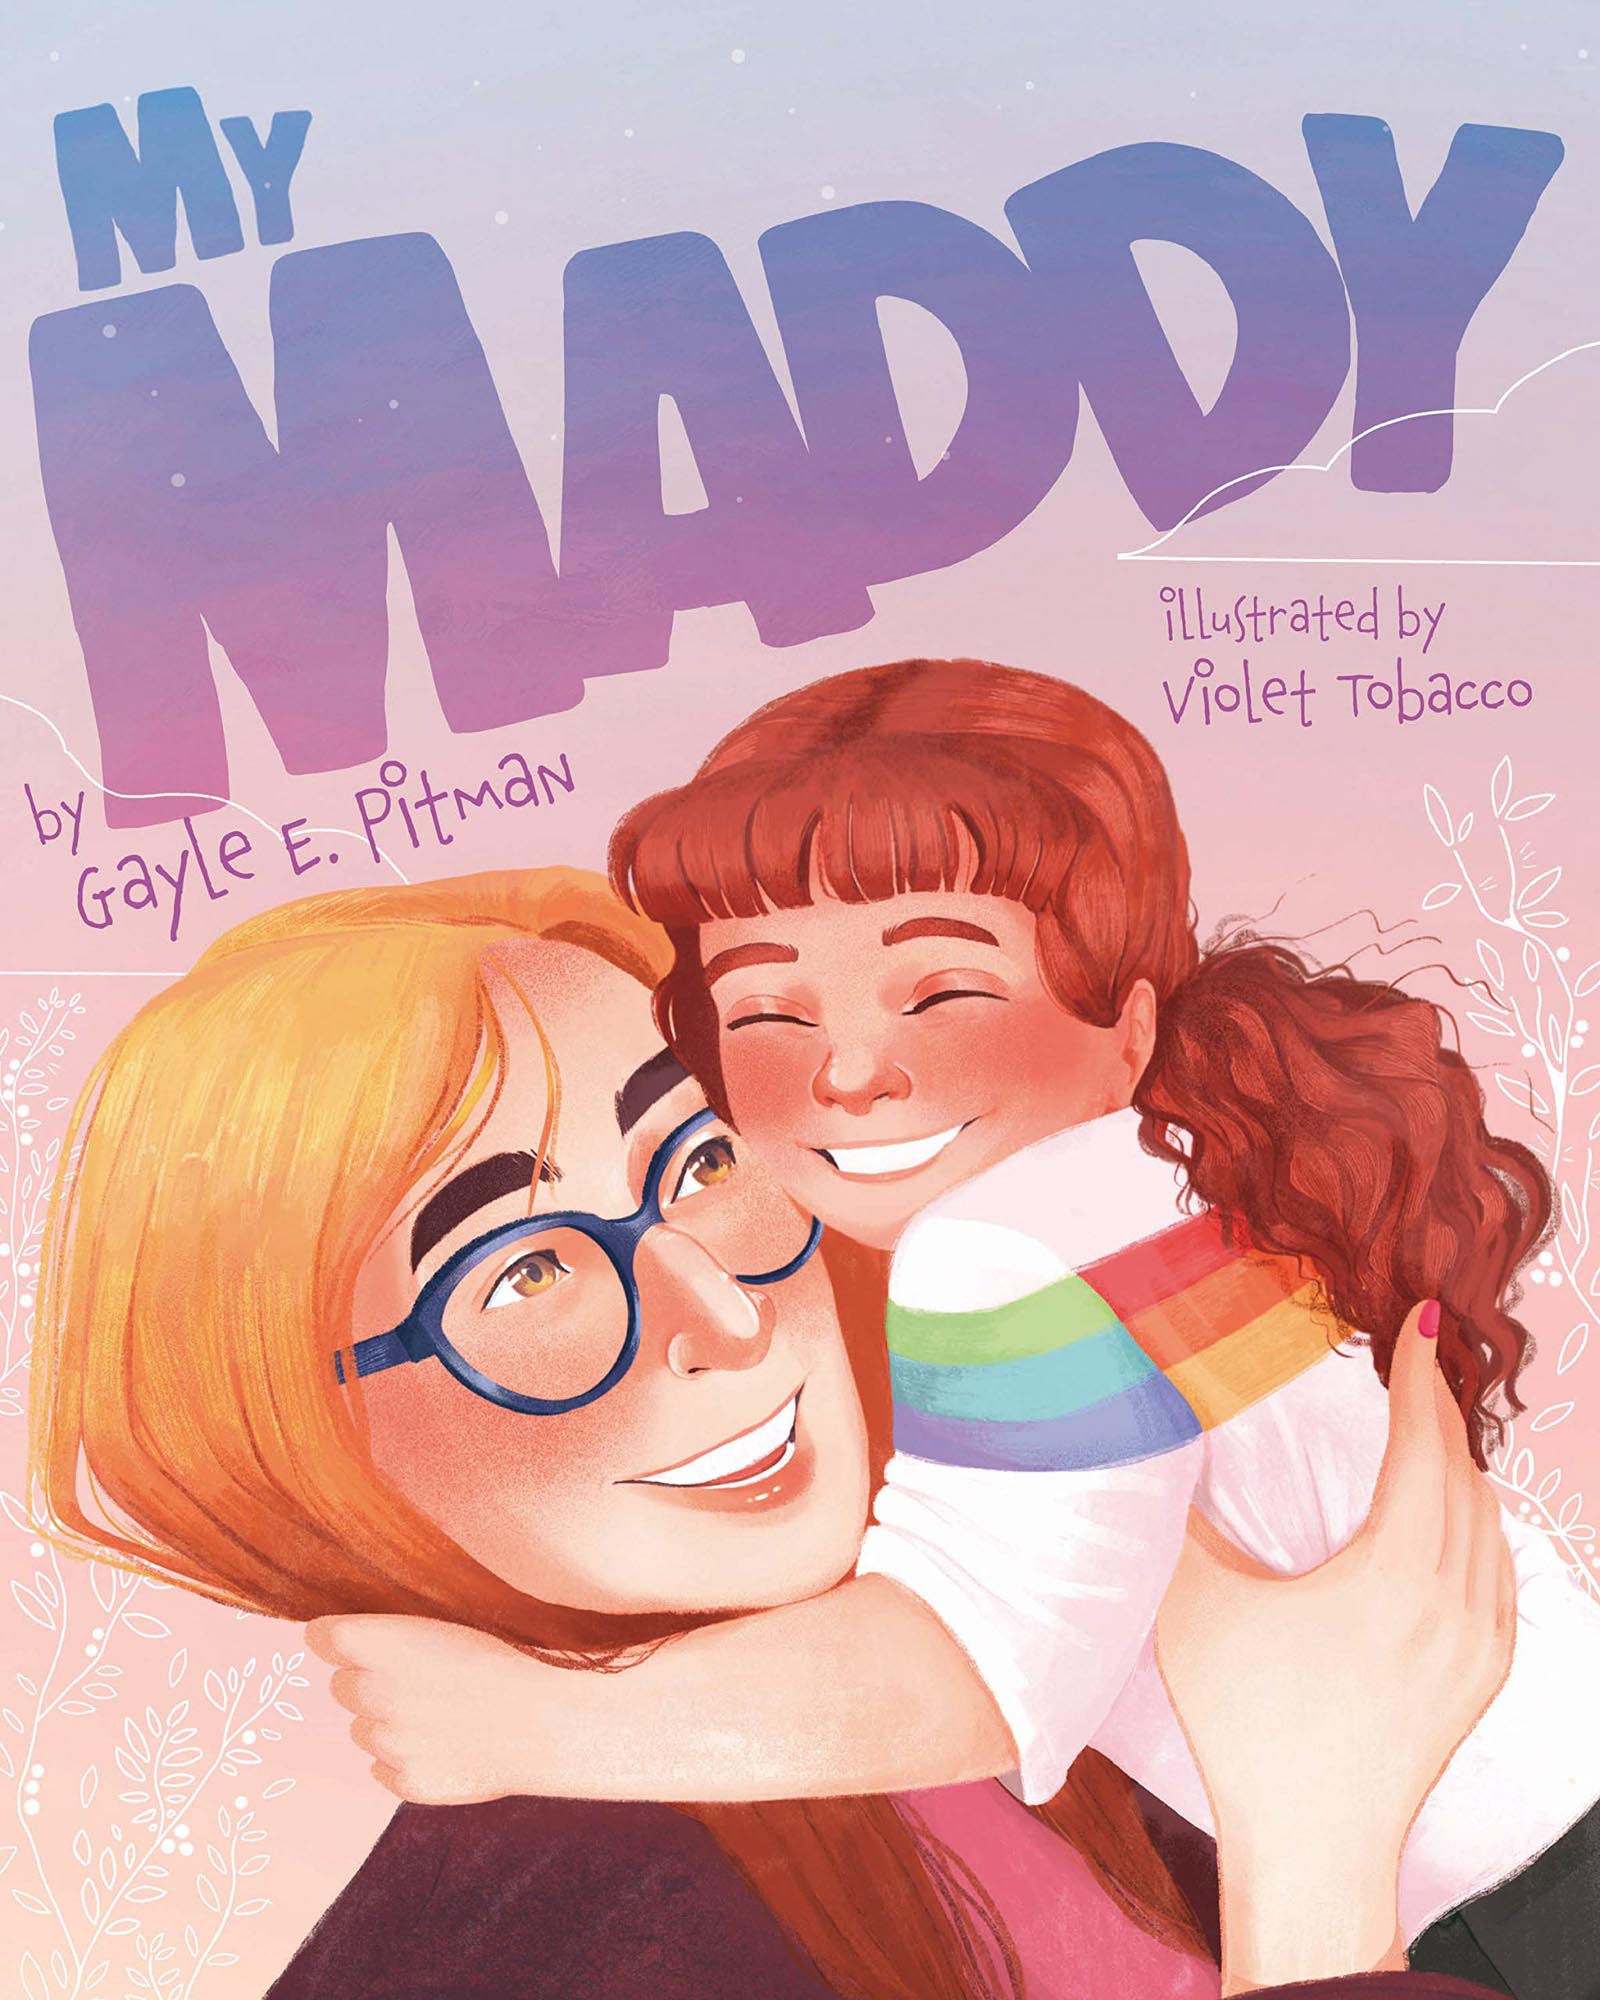 6 children's books that celebrate LGBTQ+ families | Featured on Equally Wed, the leading LGBTQ+ wedding magazine